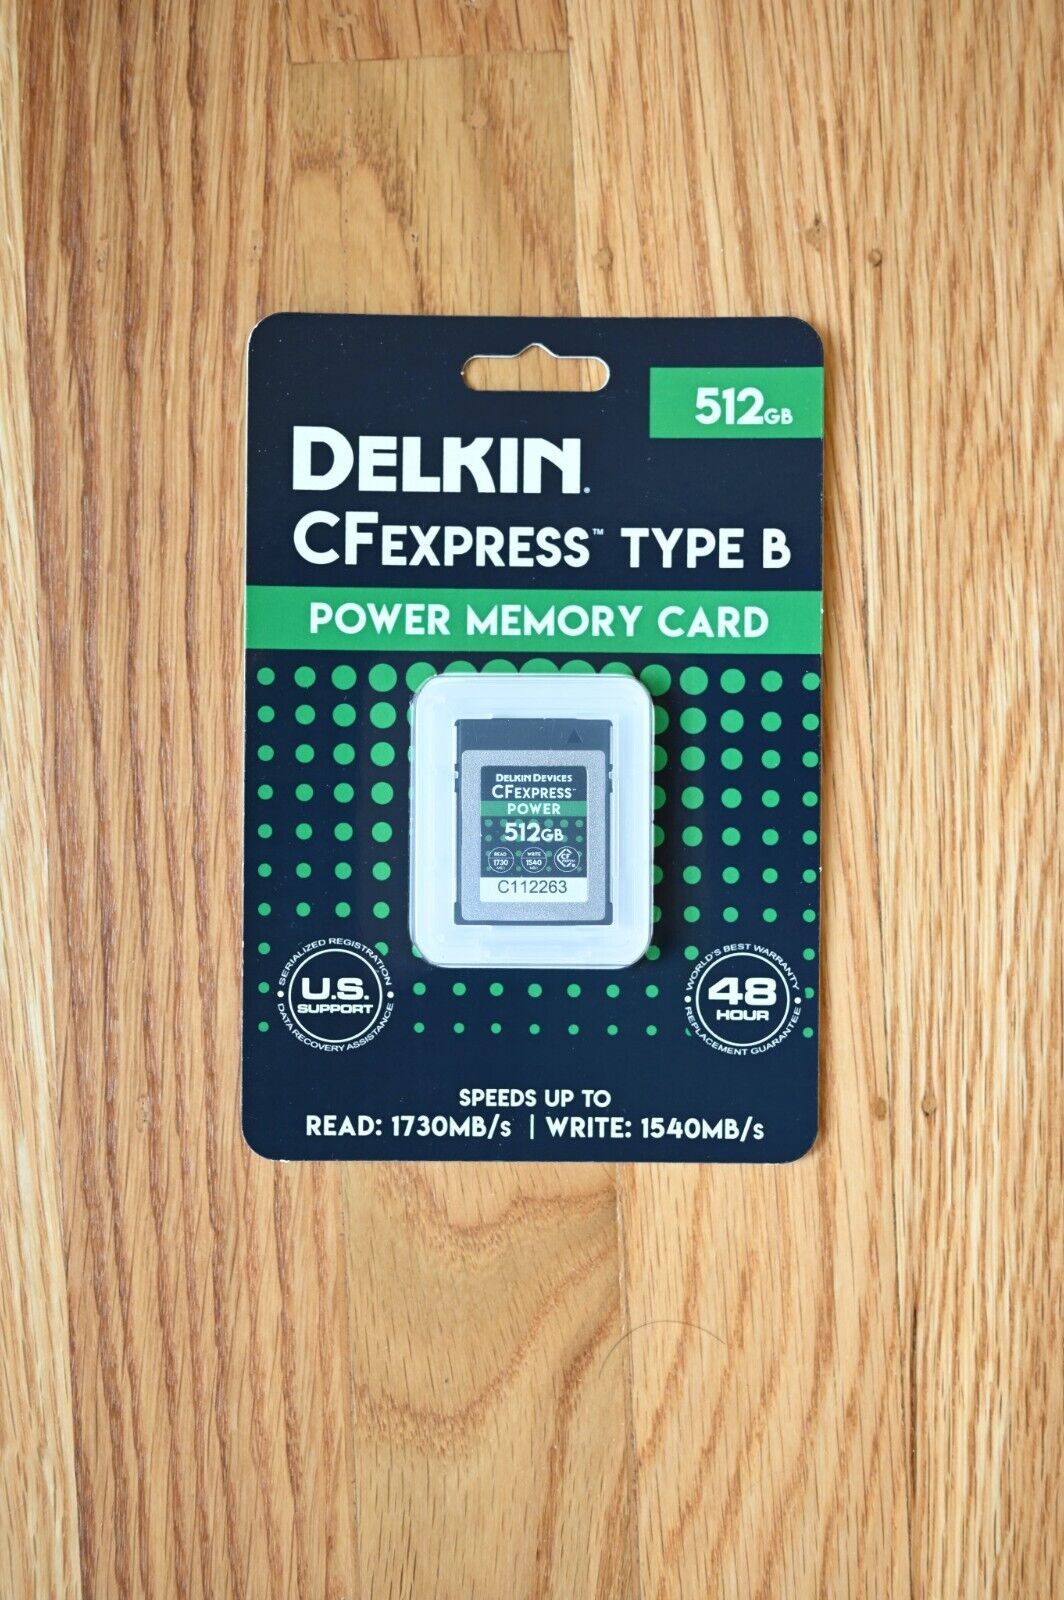 Delkin Devices CFexpress Power 512GB Type B Memory Card (DCFX1-512) for  sale online eBay